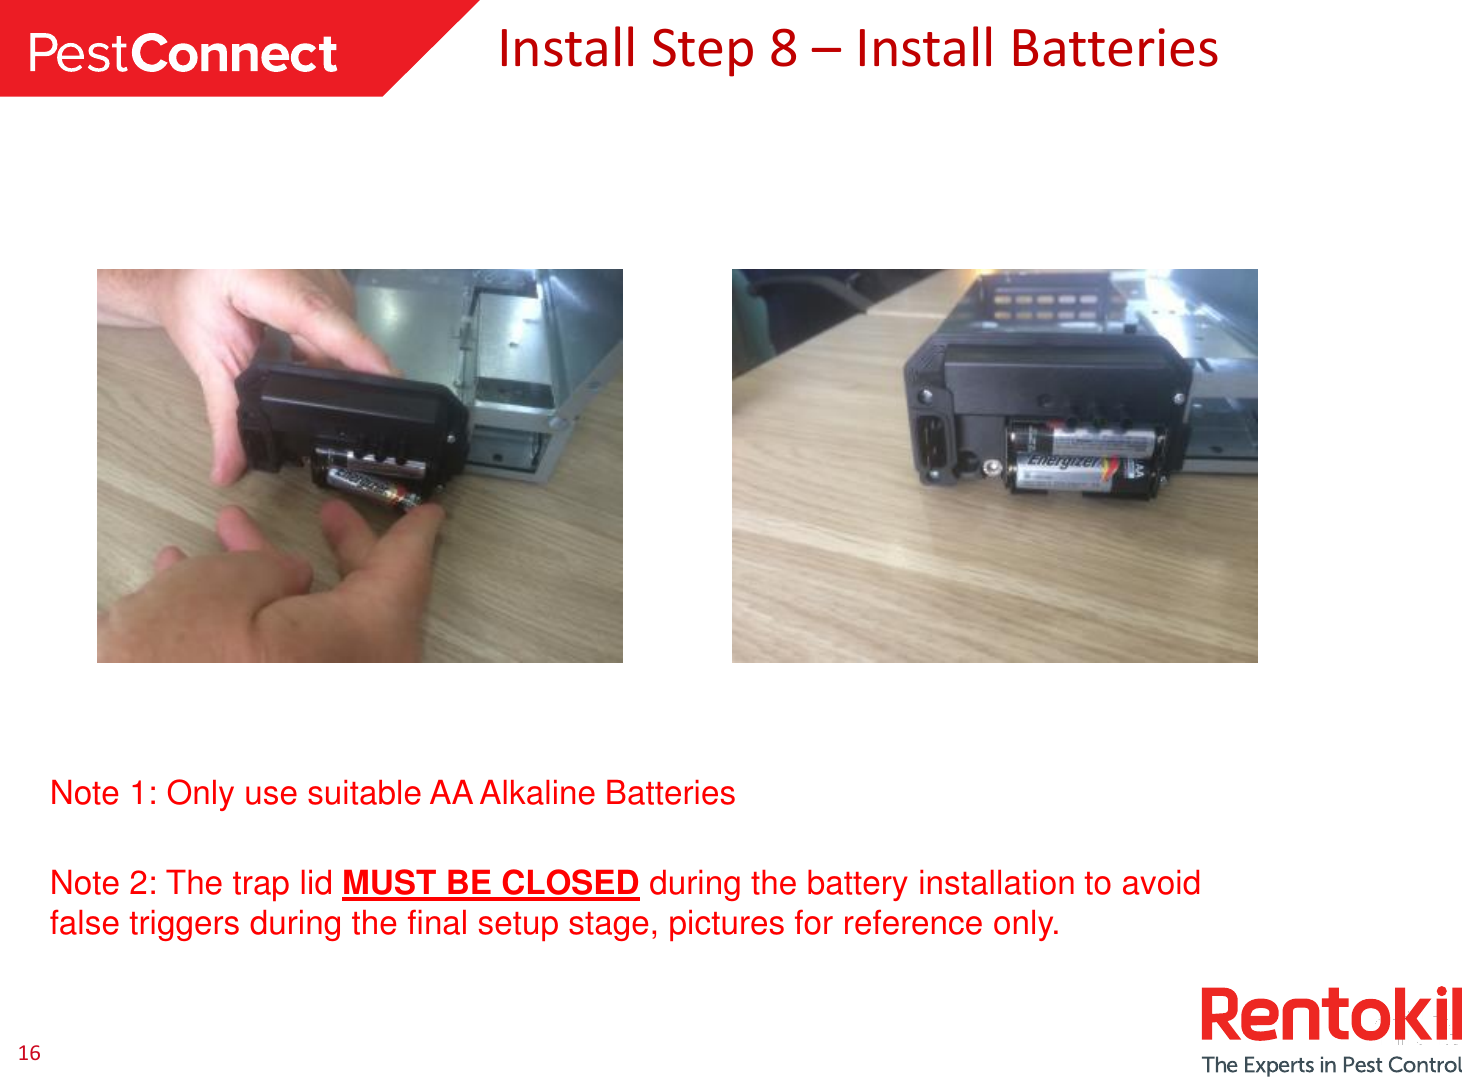 16Install Step 8 –Install BatteriesNote 1: Only use suitable AA Alkaline BatteriesNote 2: The trap lid MUST BE CLOSED during the battery installation to avoid false triggers during the final setup stage, pictures for reference only.